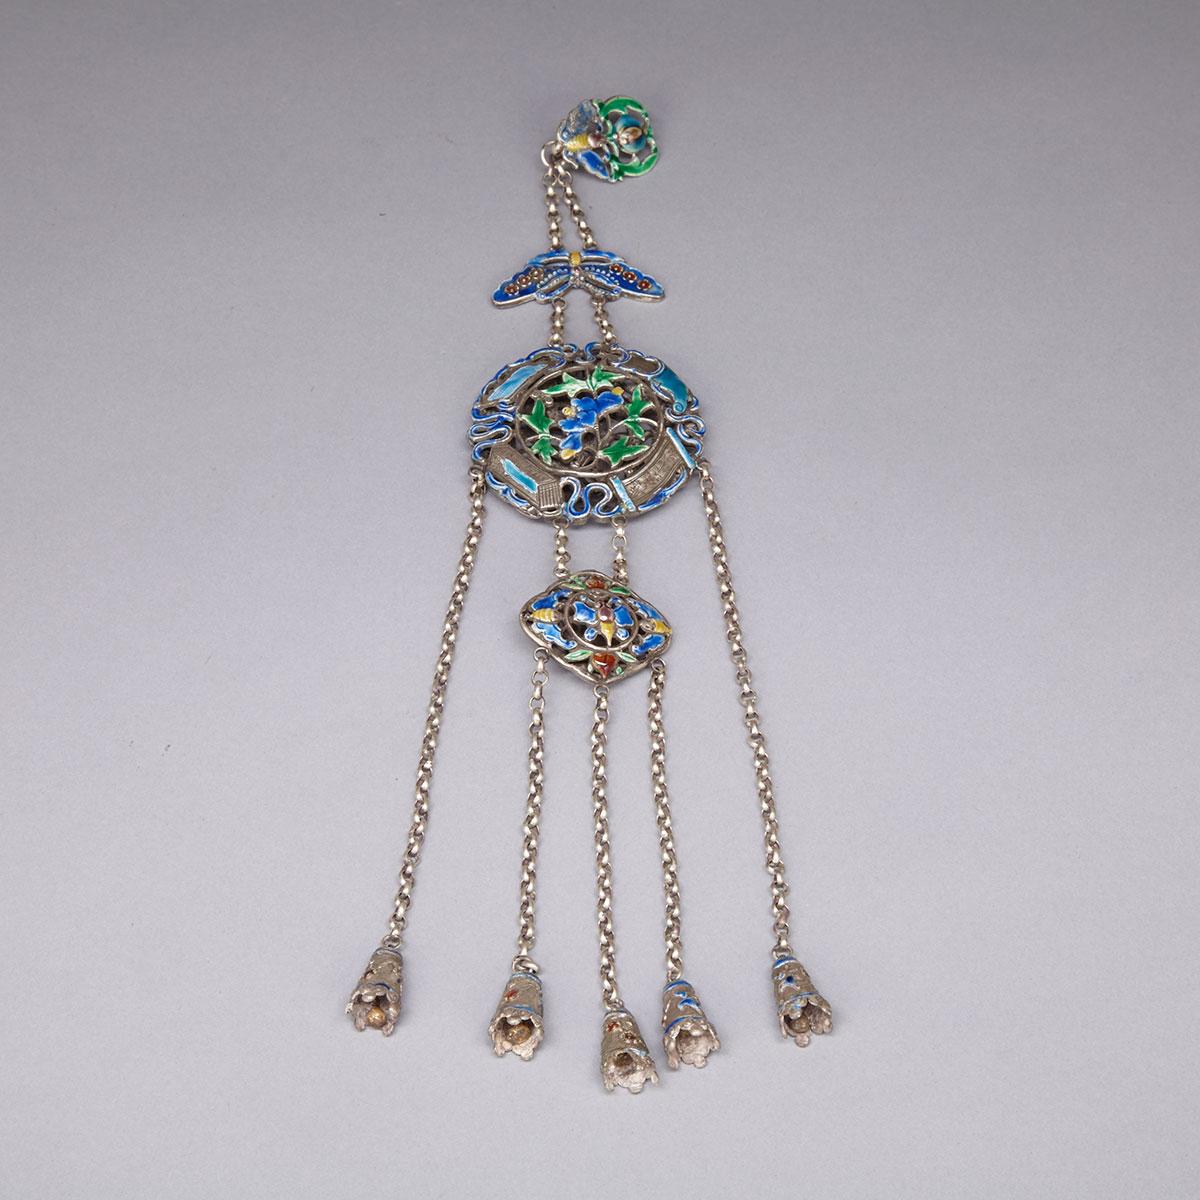 Silver and Enamel Necklace, Late 19th Century